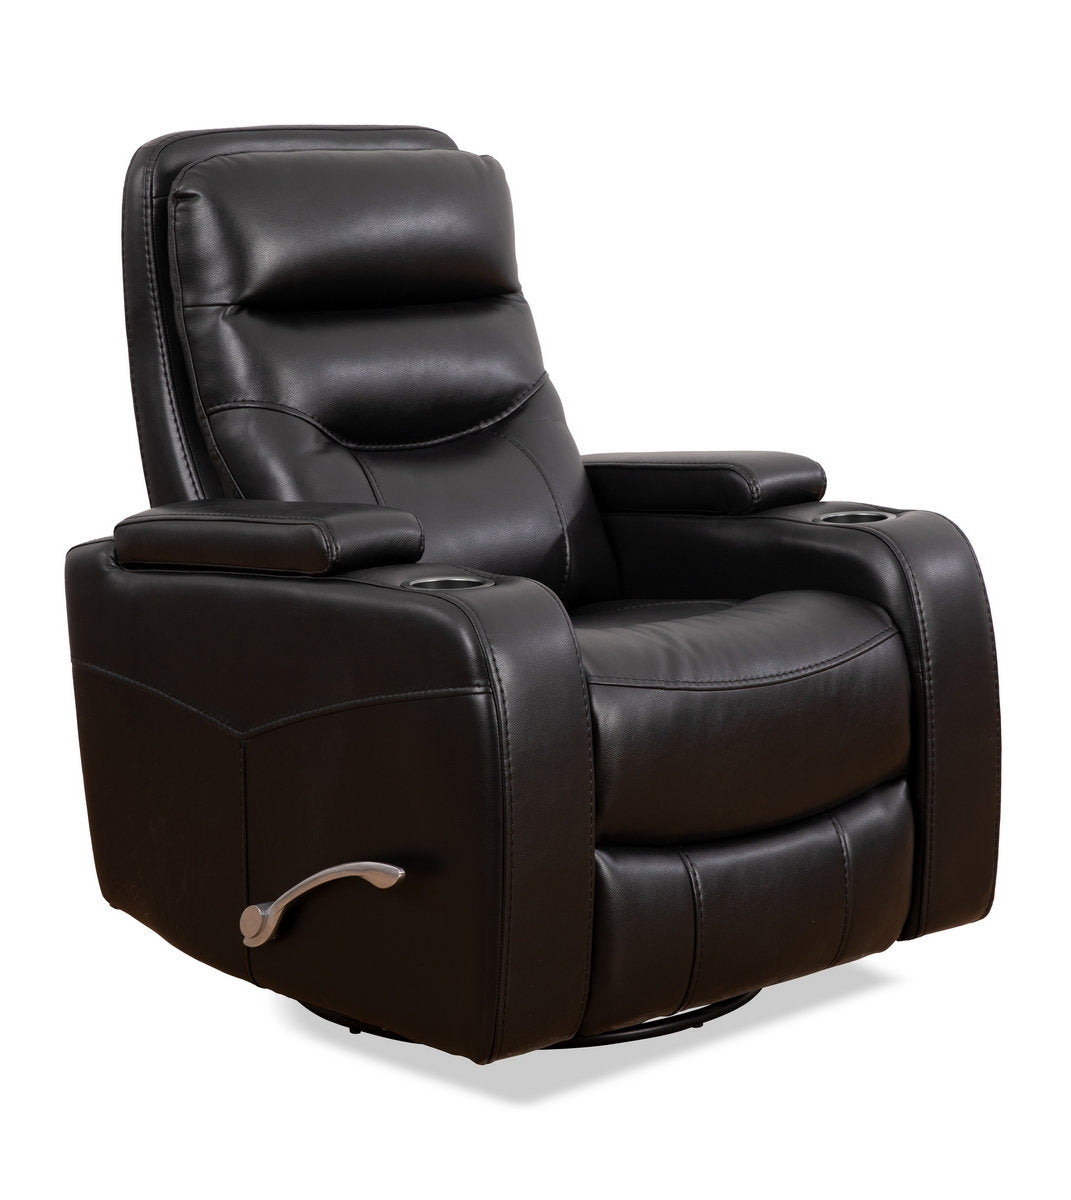 Black PU Swivel Manual Recliner Chair with Solid Hardwood Frame